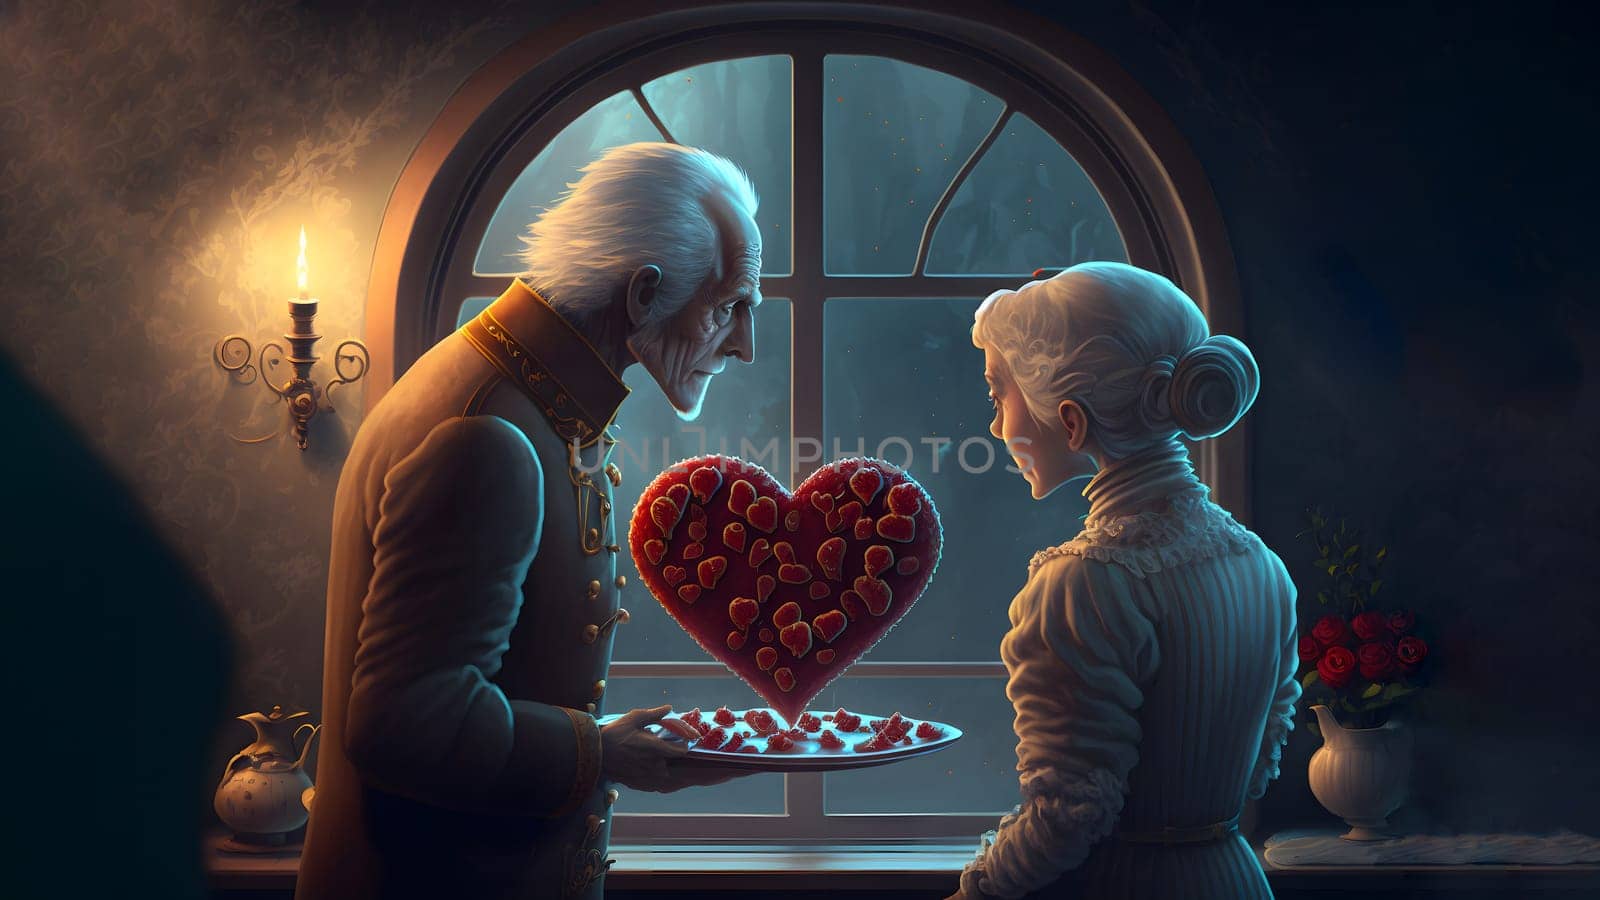 elder pair date with large red heart-shaped symbol of valentines day, neural network generated art by z1b